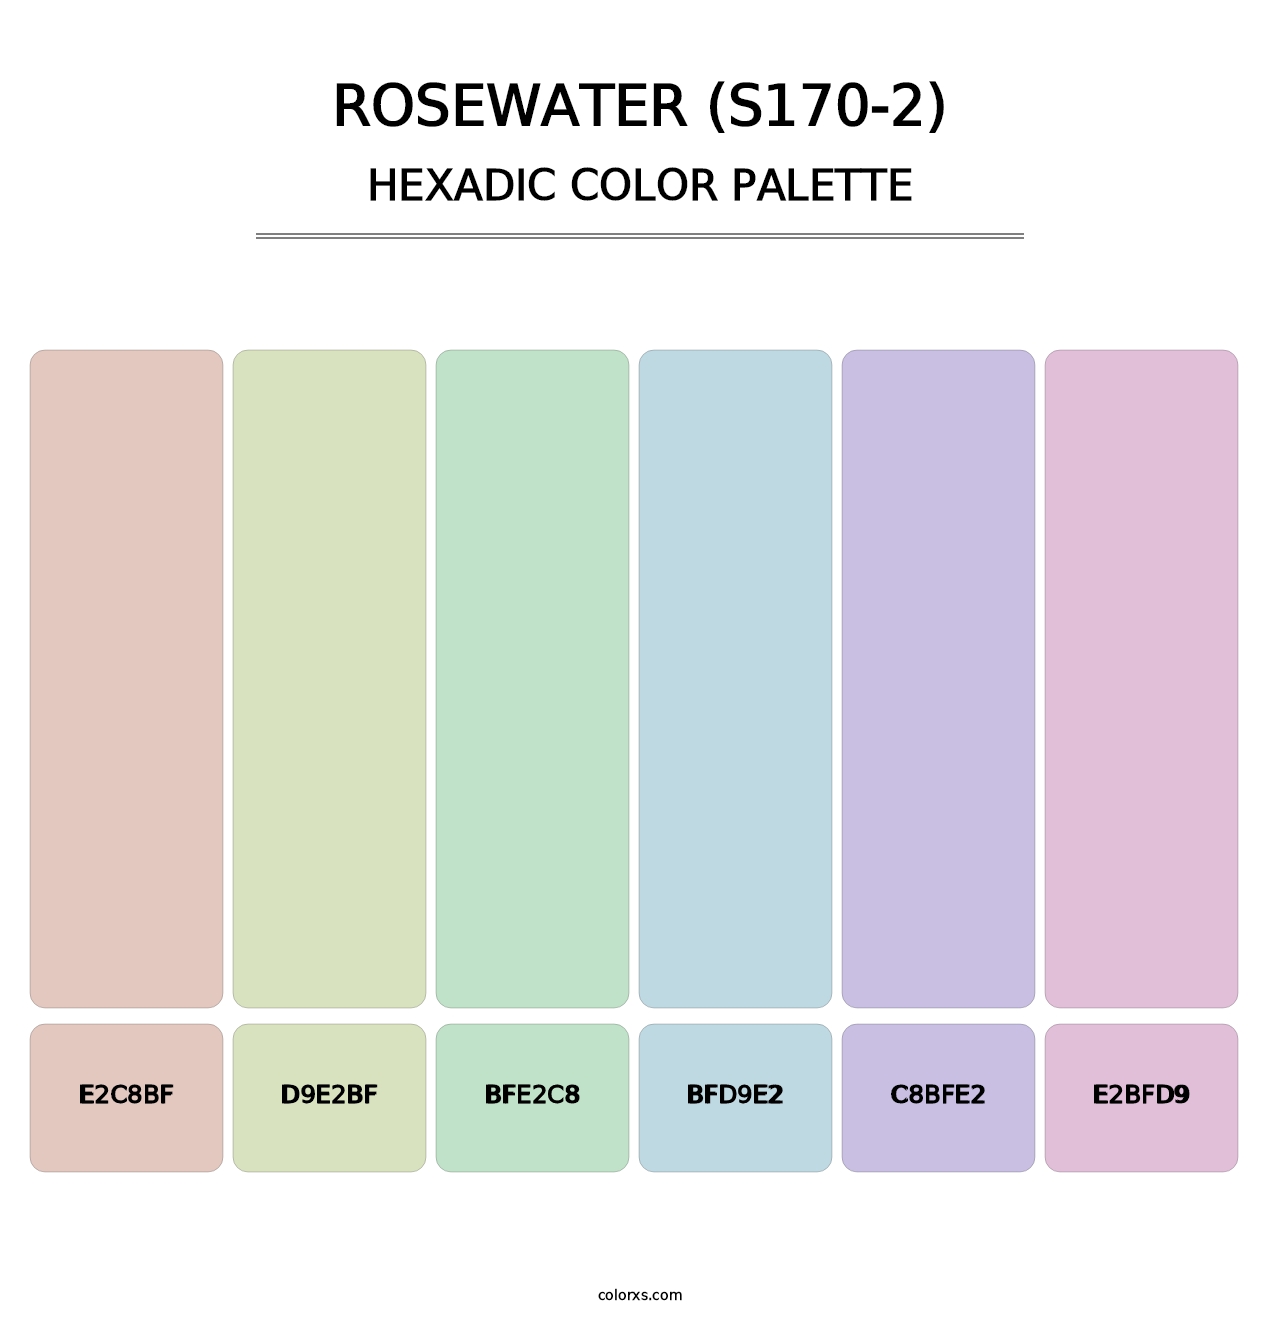 Rosewater (S170-2) - Hexadic Color Palette